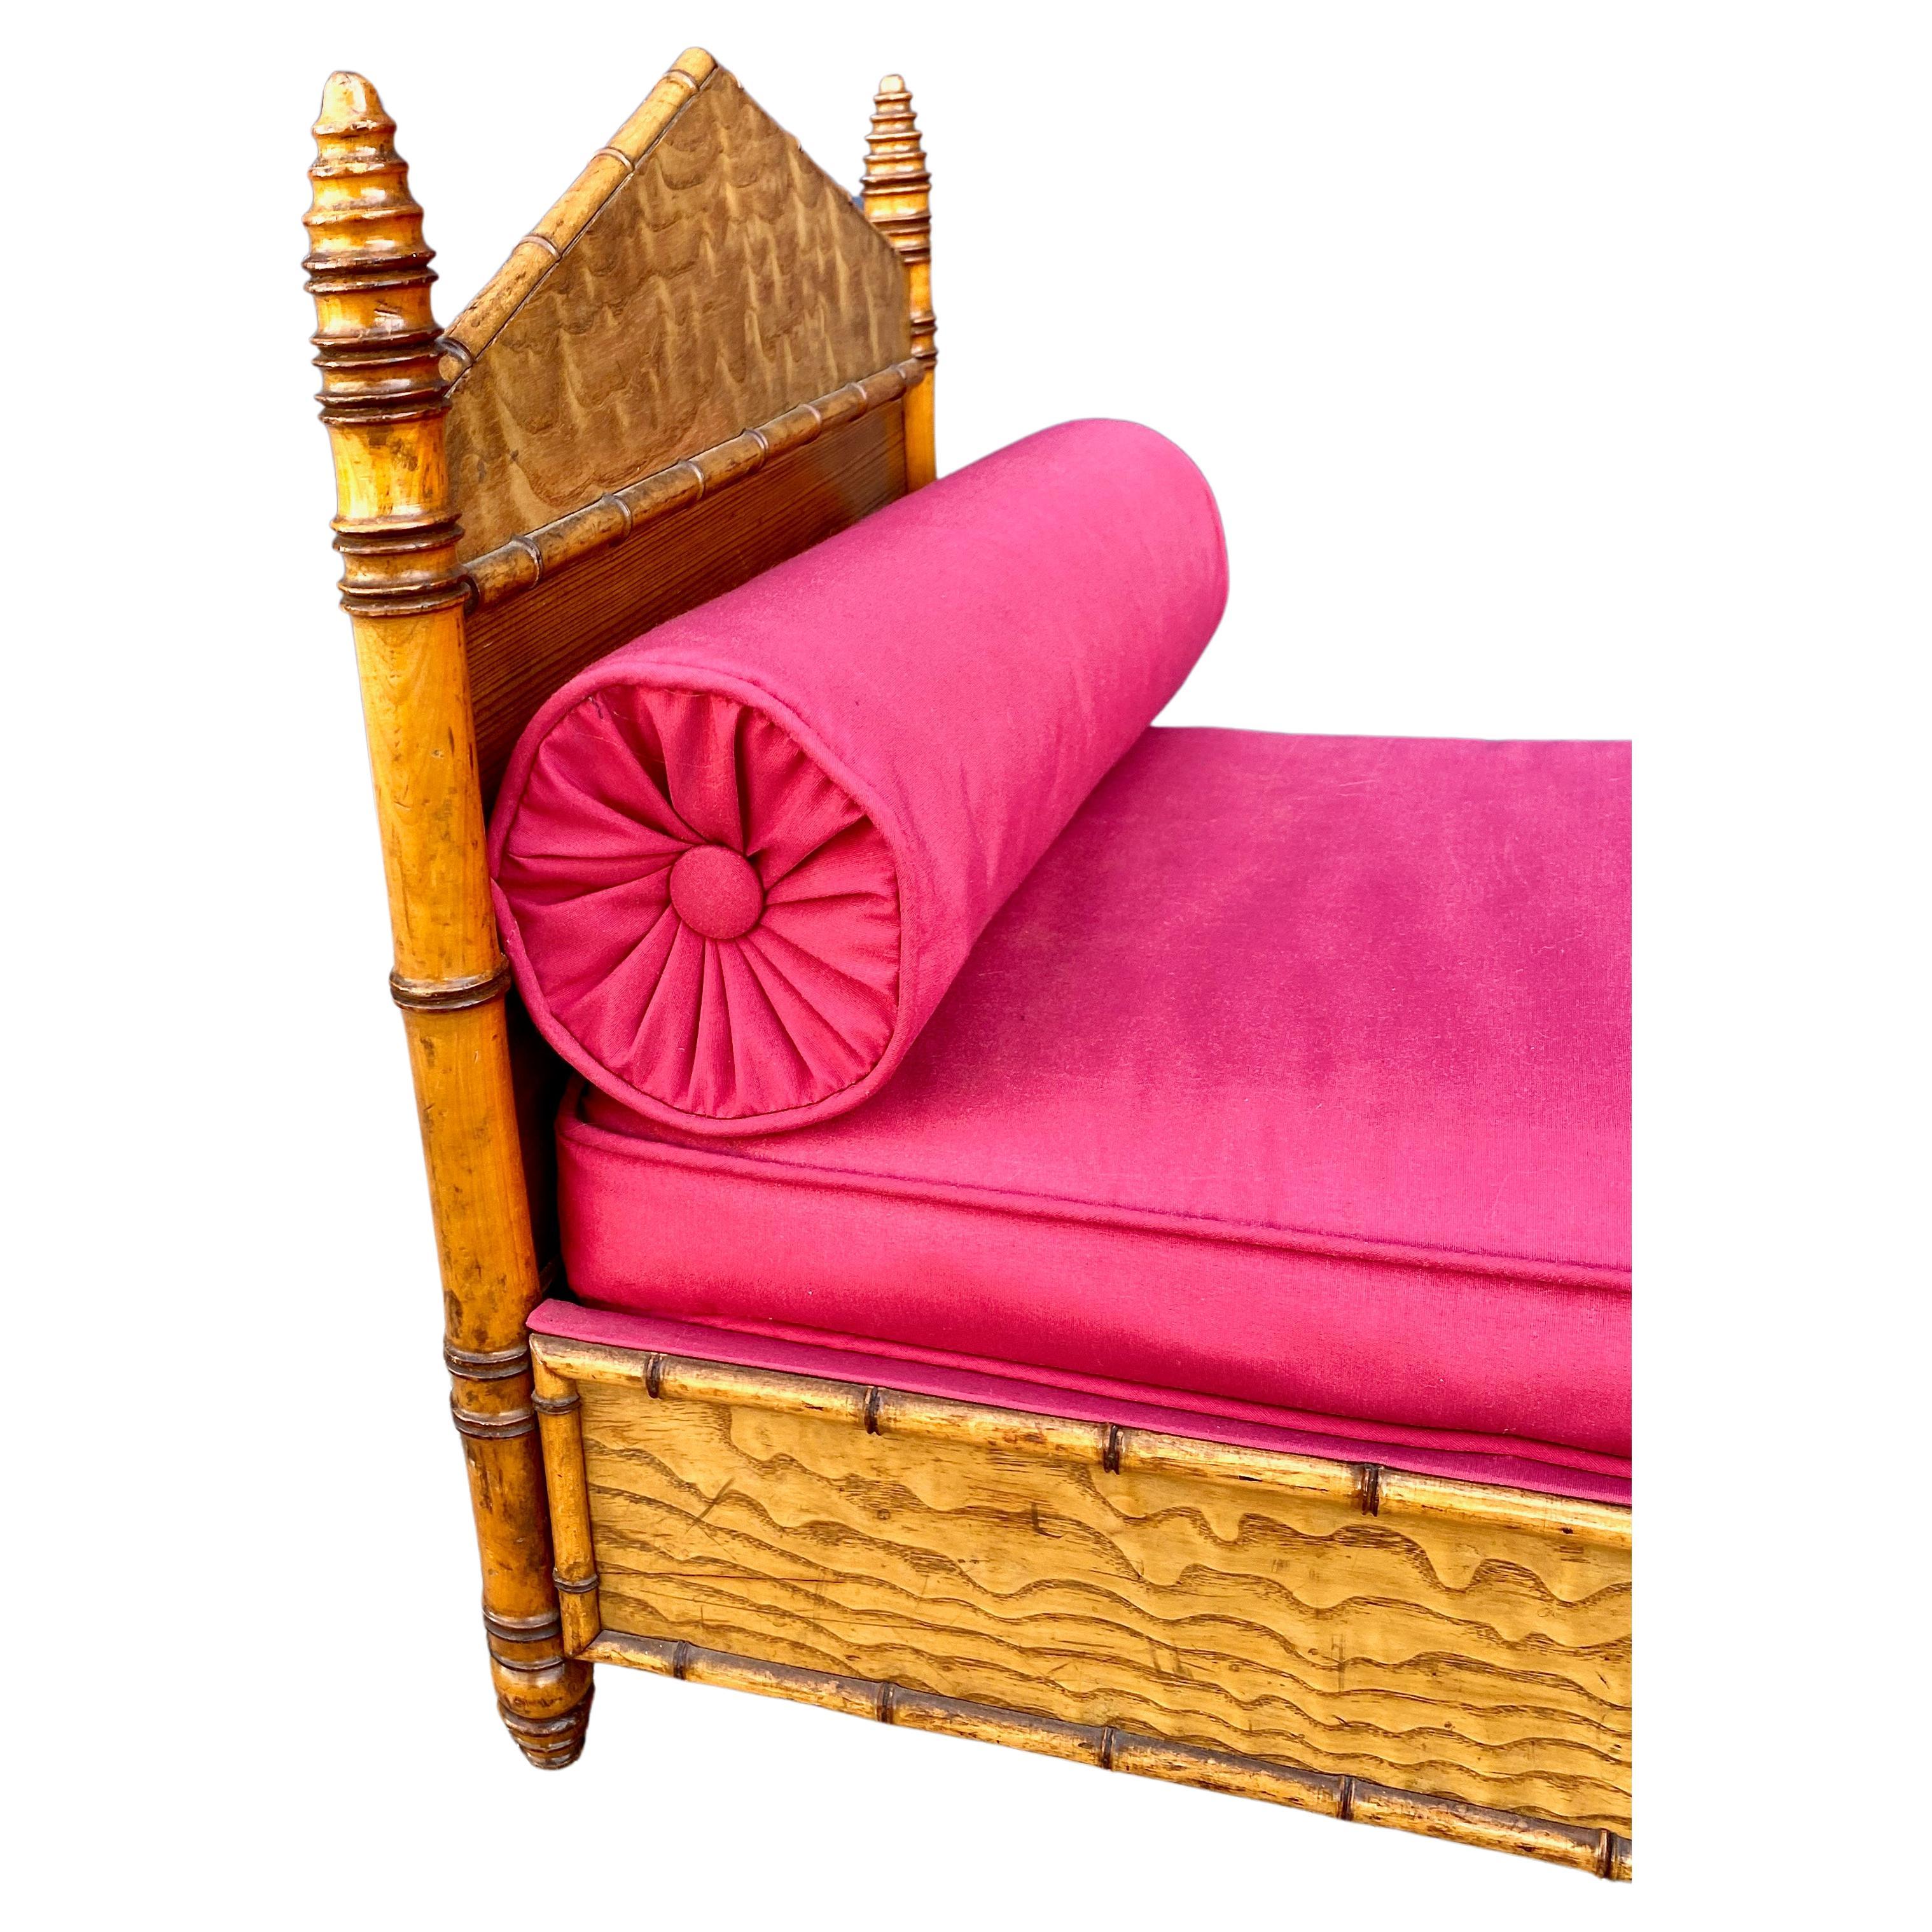 This a charming Faux Bamboo Doll Bed ( dog bed?) that date to the late 19th century. This little bed is in very good condition and features turned beehive finials, a pyramid form headboard and footboard and it is upholstered in a hot pink. The bed